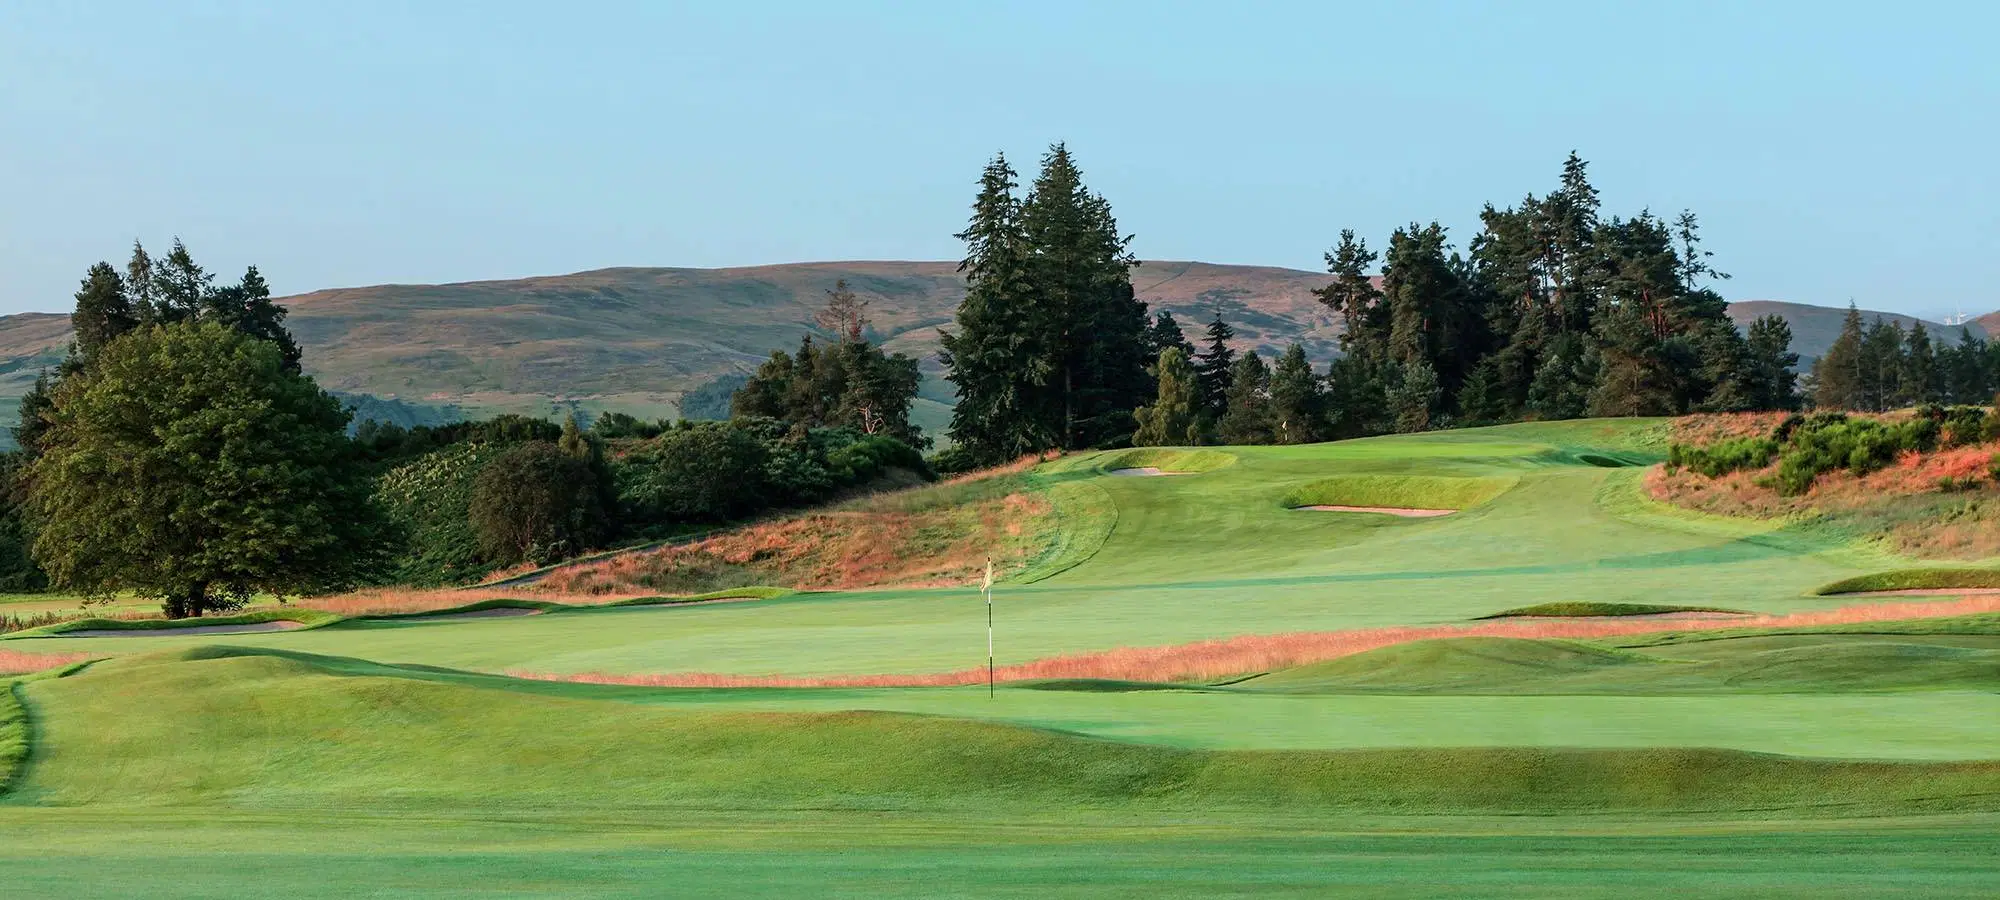 The Home of Golf: Your Next Golfing Staycation